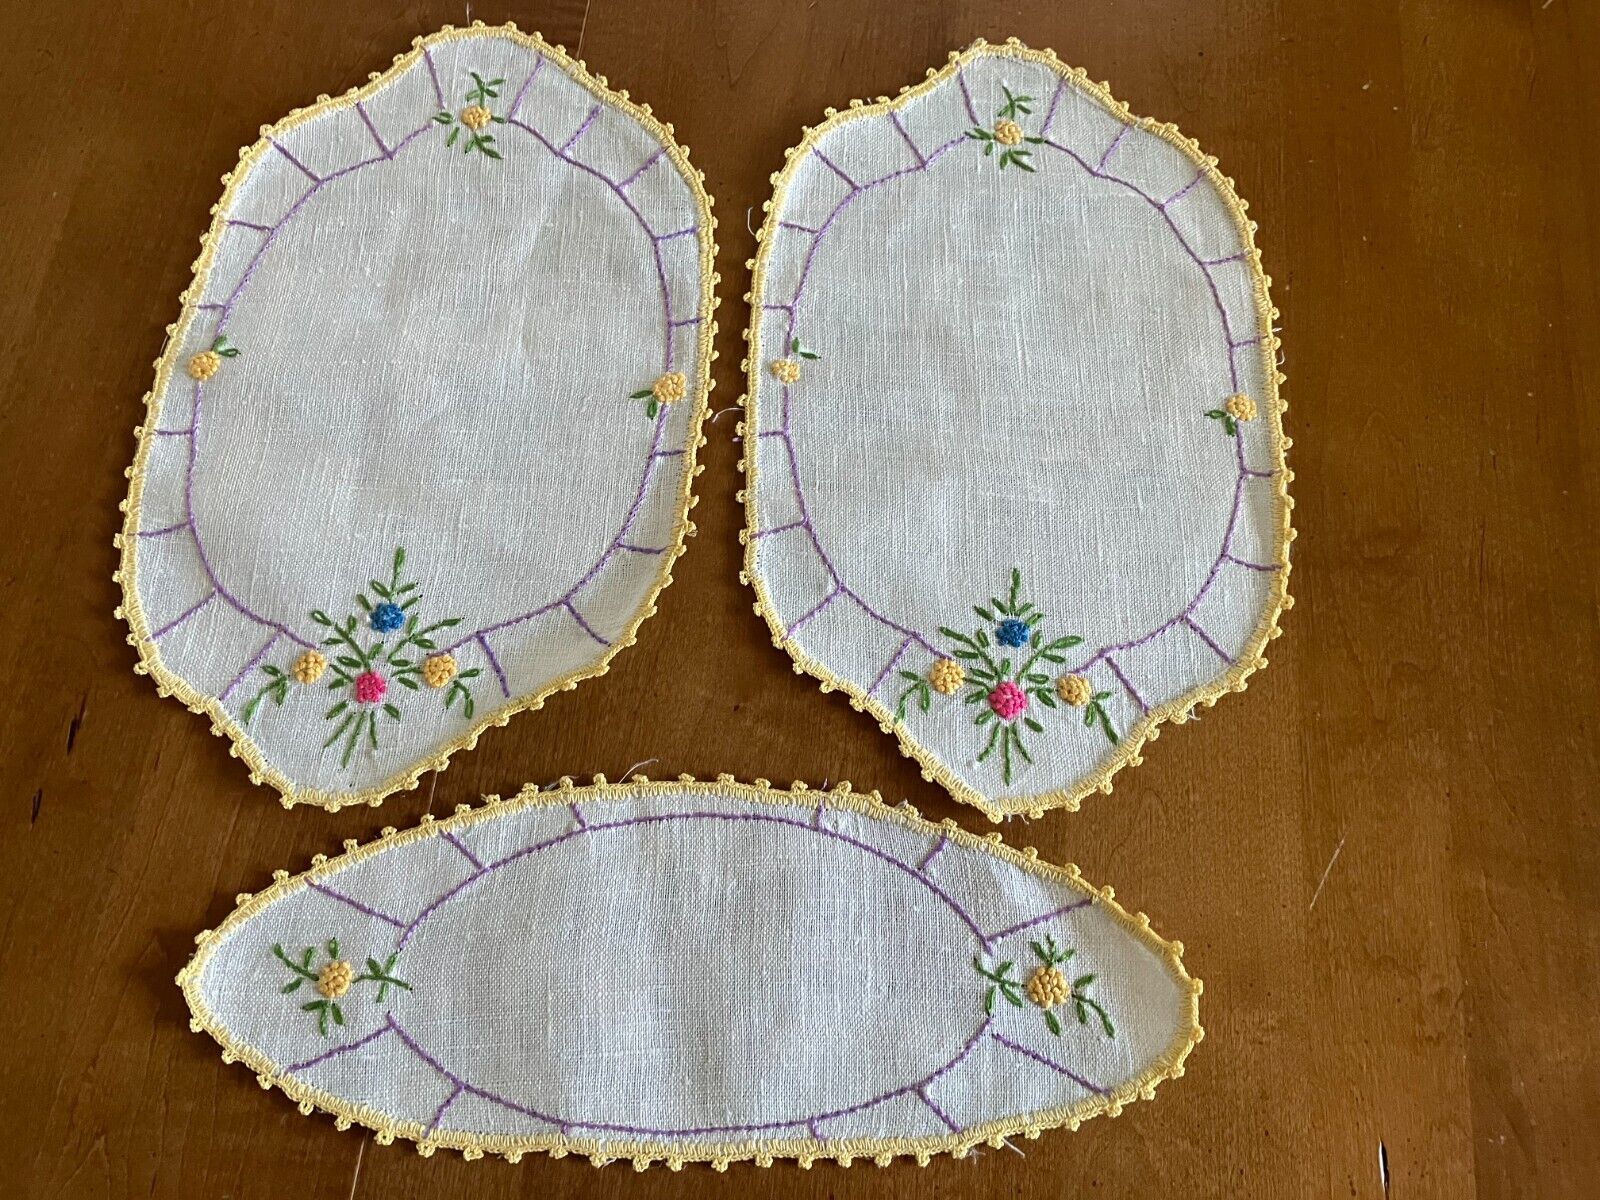 VTG 3 PC DOILY SET  CREAM  with YELLOW EDGING FLORAL